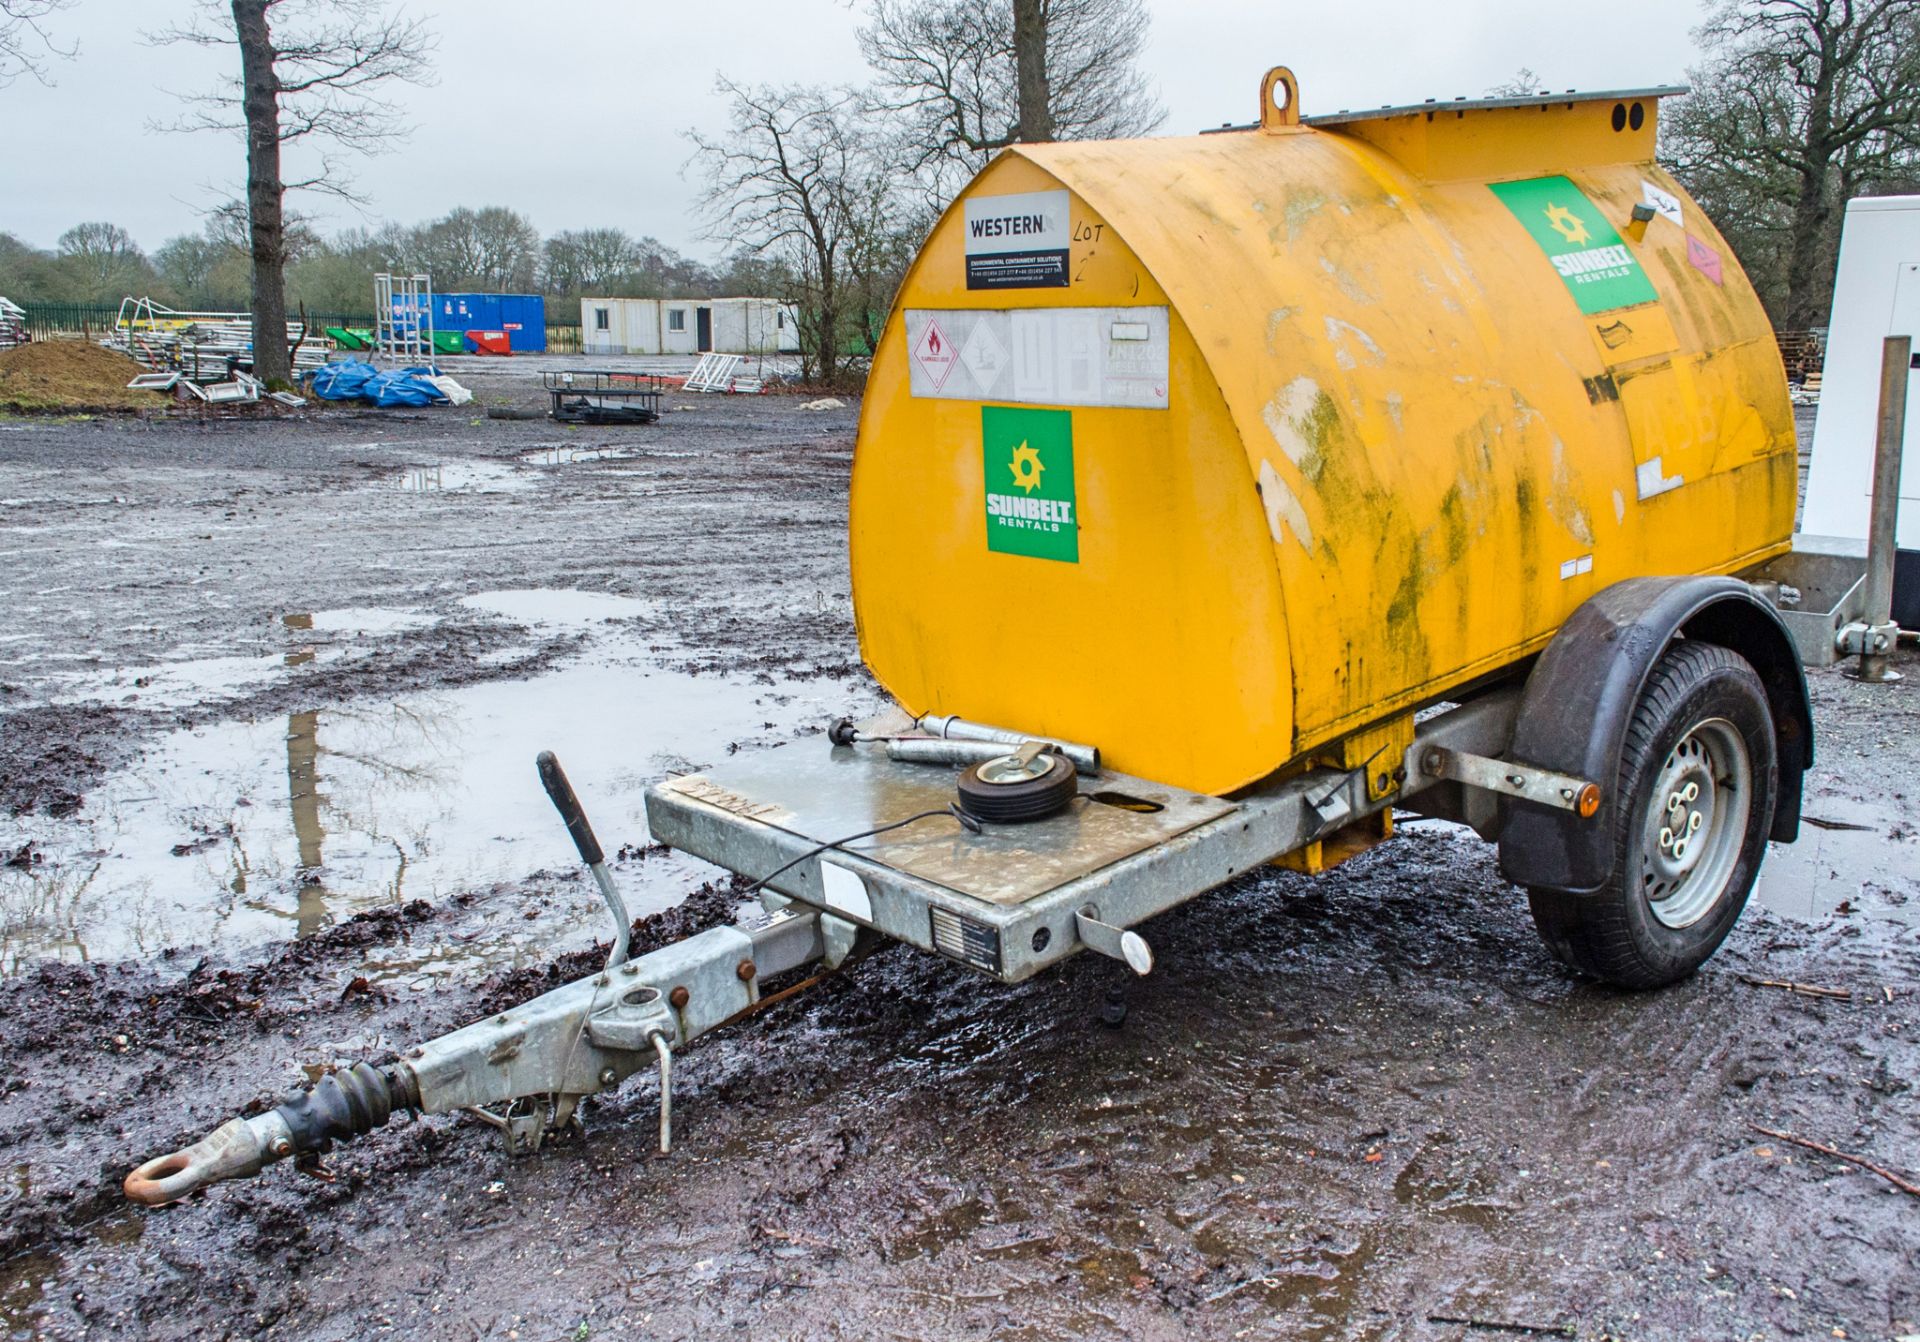 Western Abbi 950 litre fast tow bunded fuel bowser c/w 12v electric pump, delivery hose and nozzle